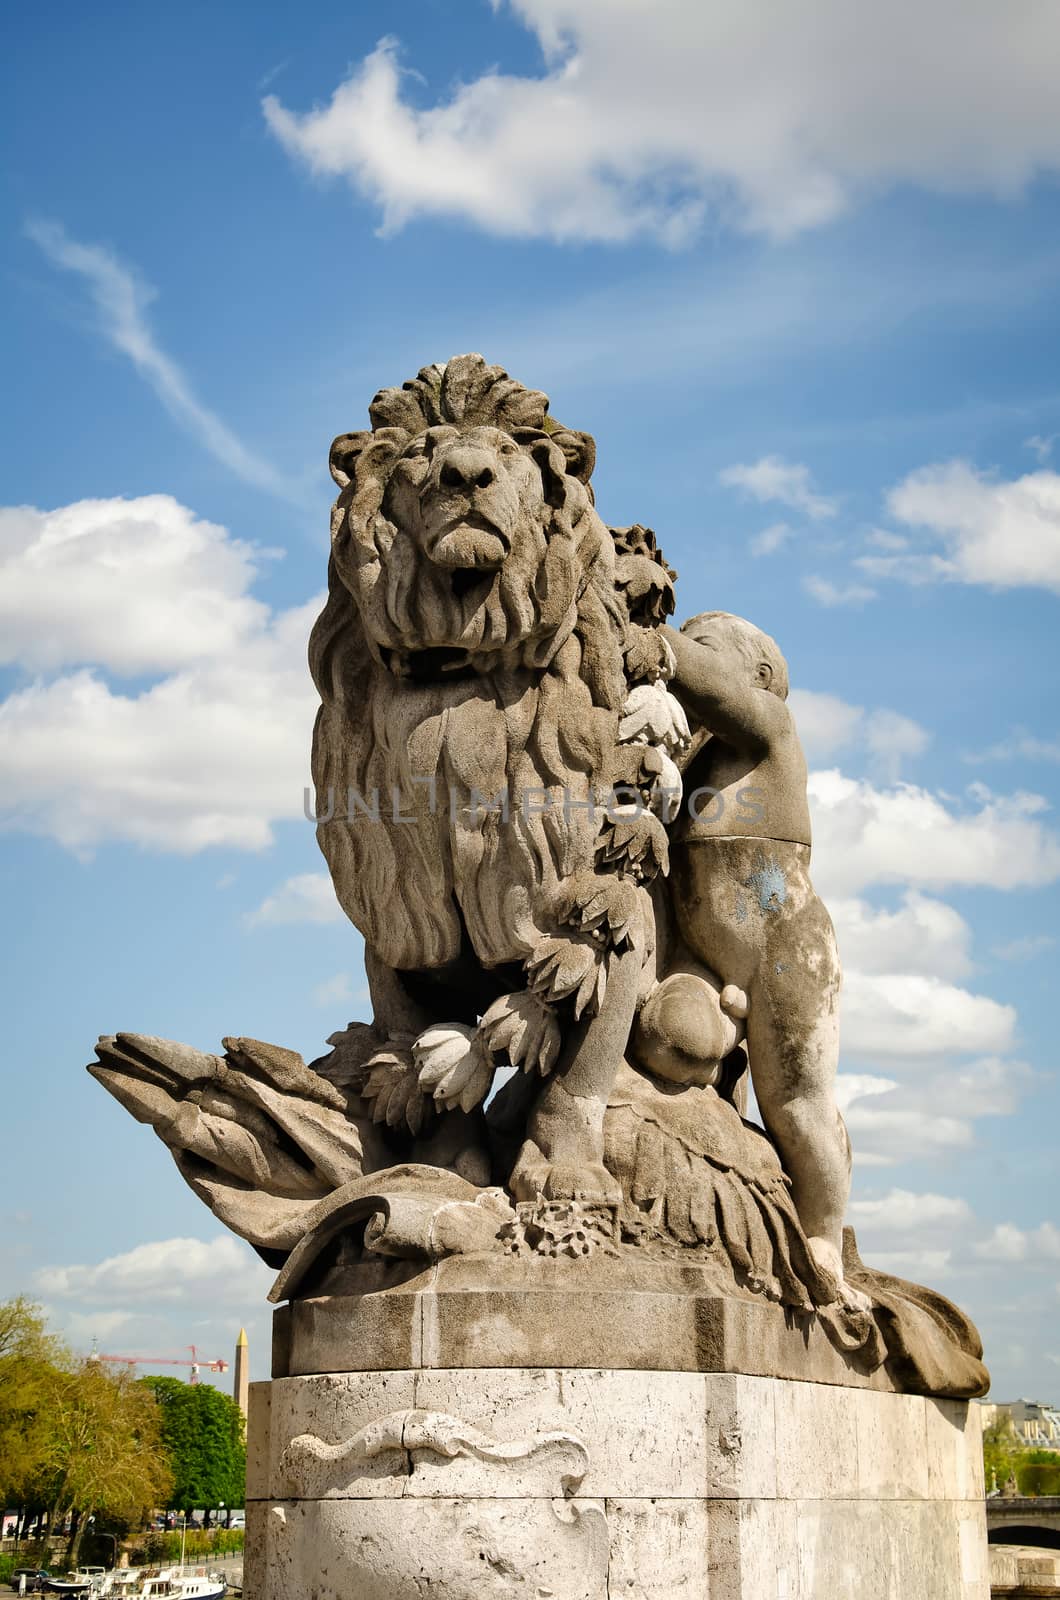 The sculpture Lion steered by a child at Alexander III bridge by Valegorov